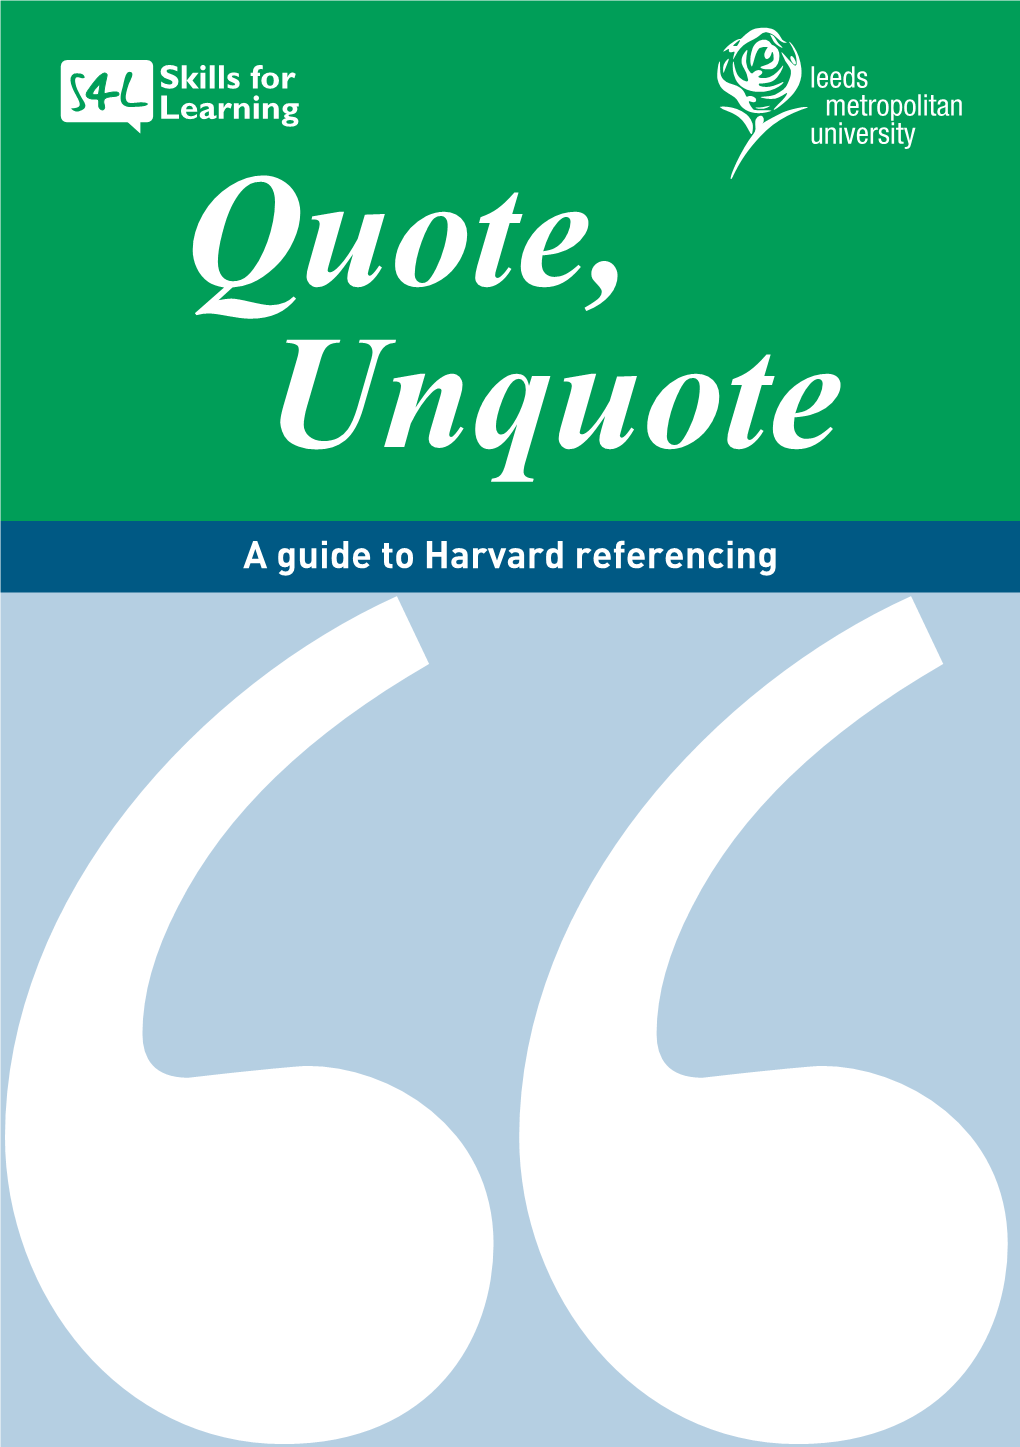 Quote, Unquote a Guide to Harvard Referencing ‘‘ 36337 Quote Unquote Booklet-POB:Layout 1 21/5/09 09:44 Page B